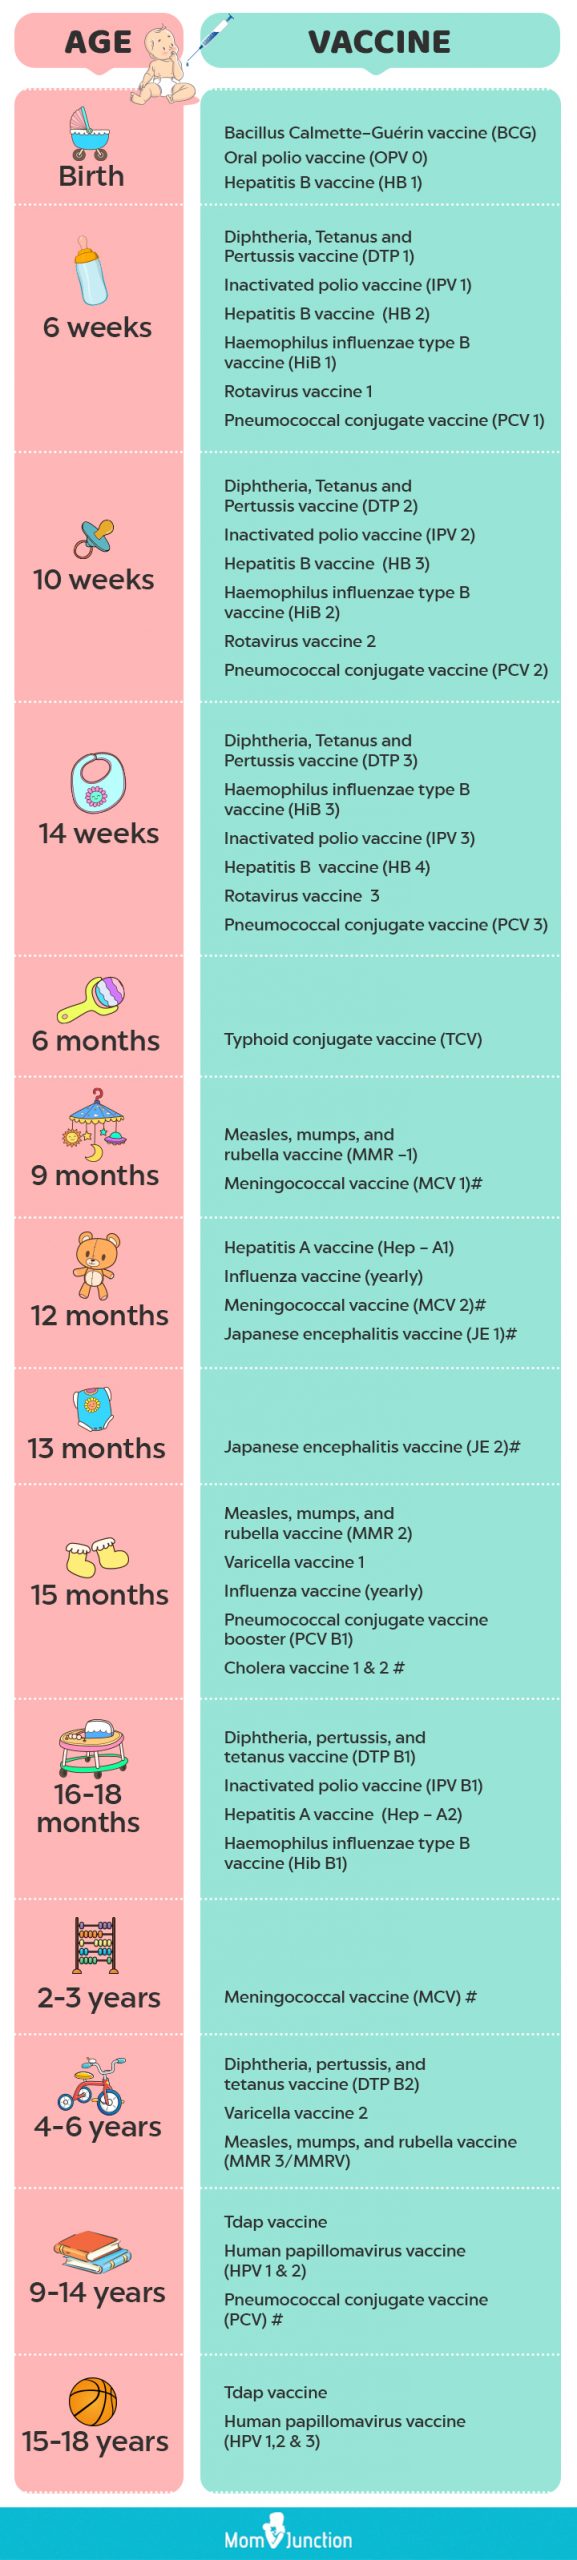 baby-vaccination-schedule-and-chart-in-india-2021